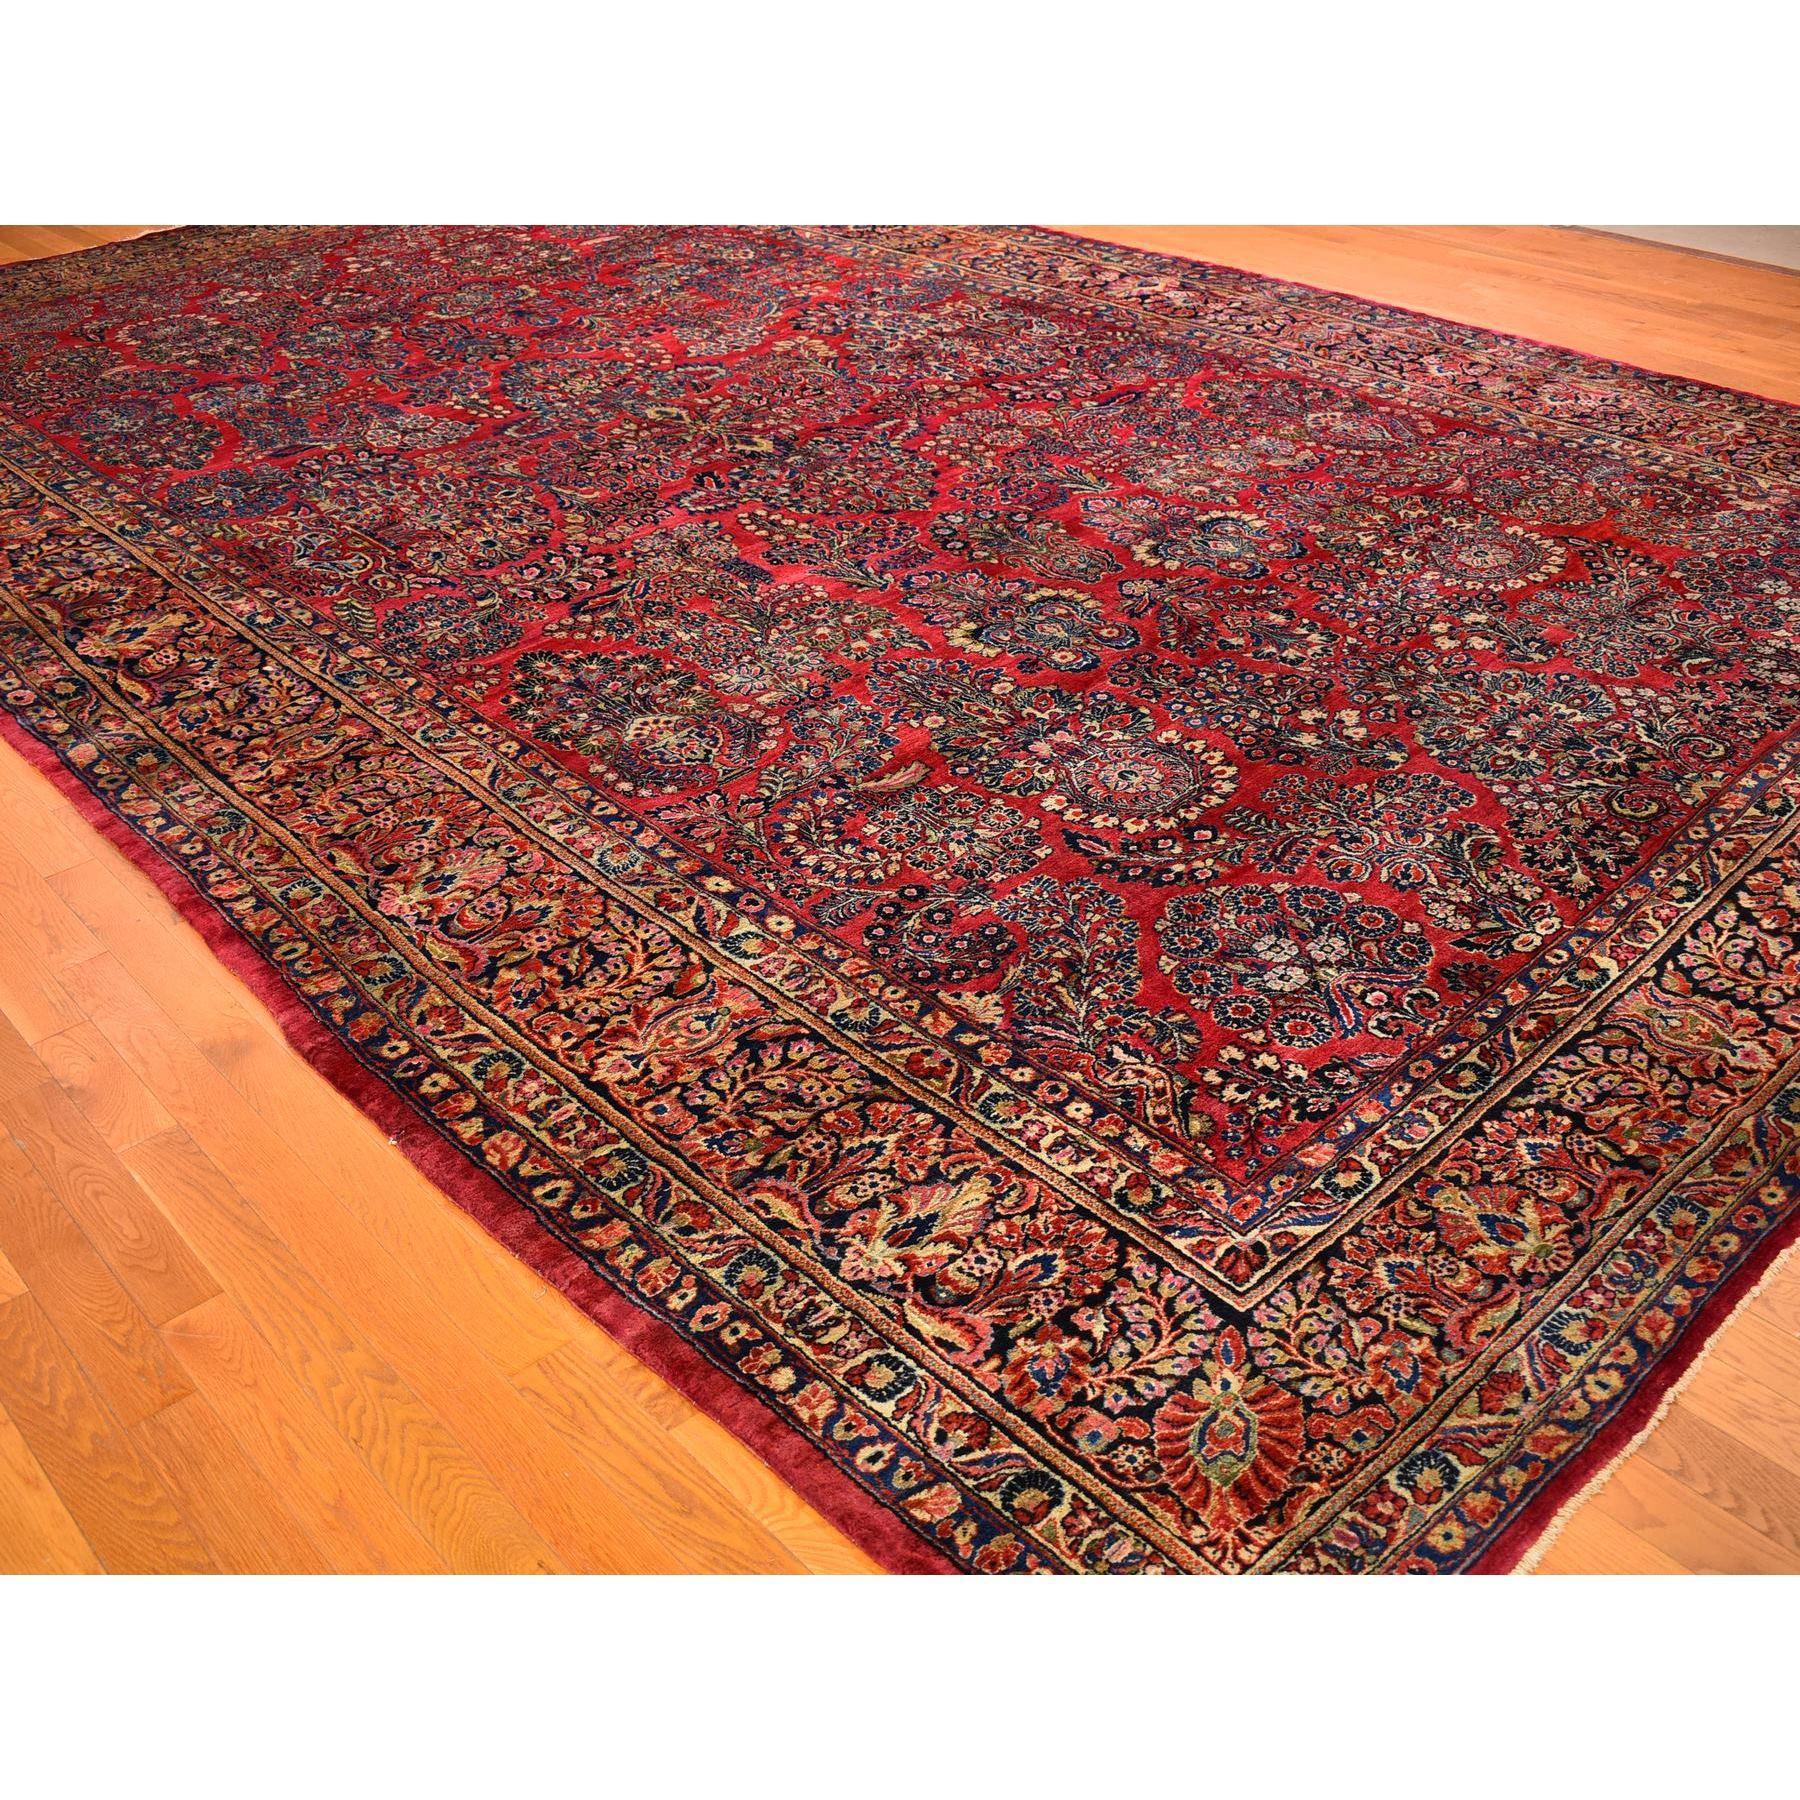 Medieval Oversized Red Antique Persian Sarouk Soft Wool Full Pile Hand Knotted Rug